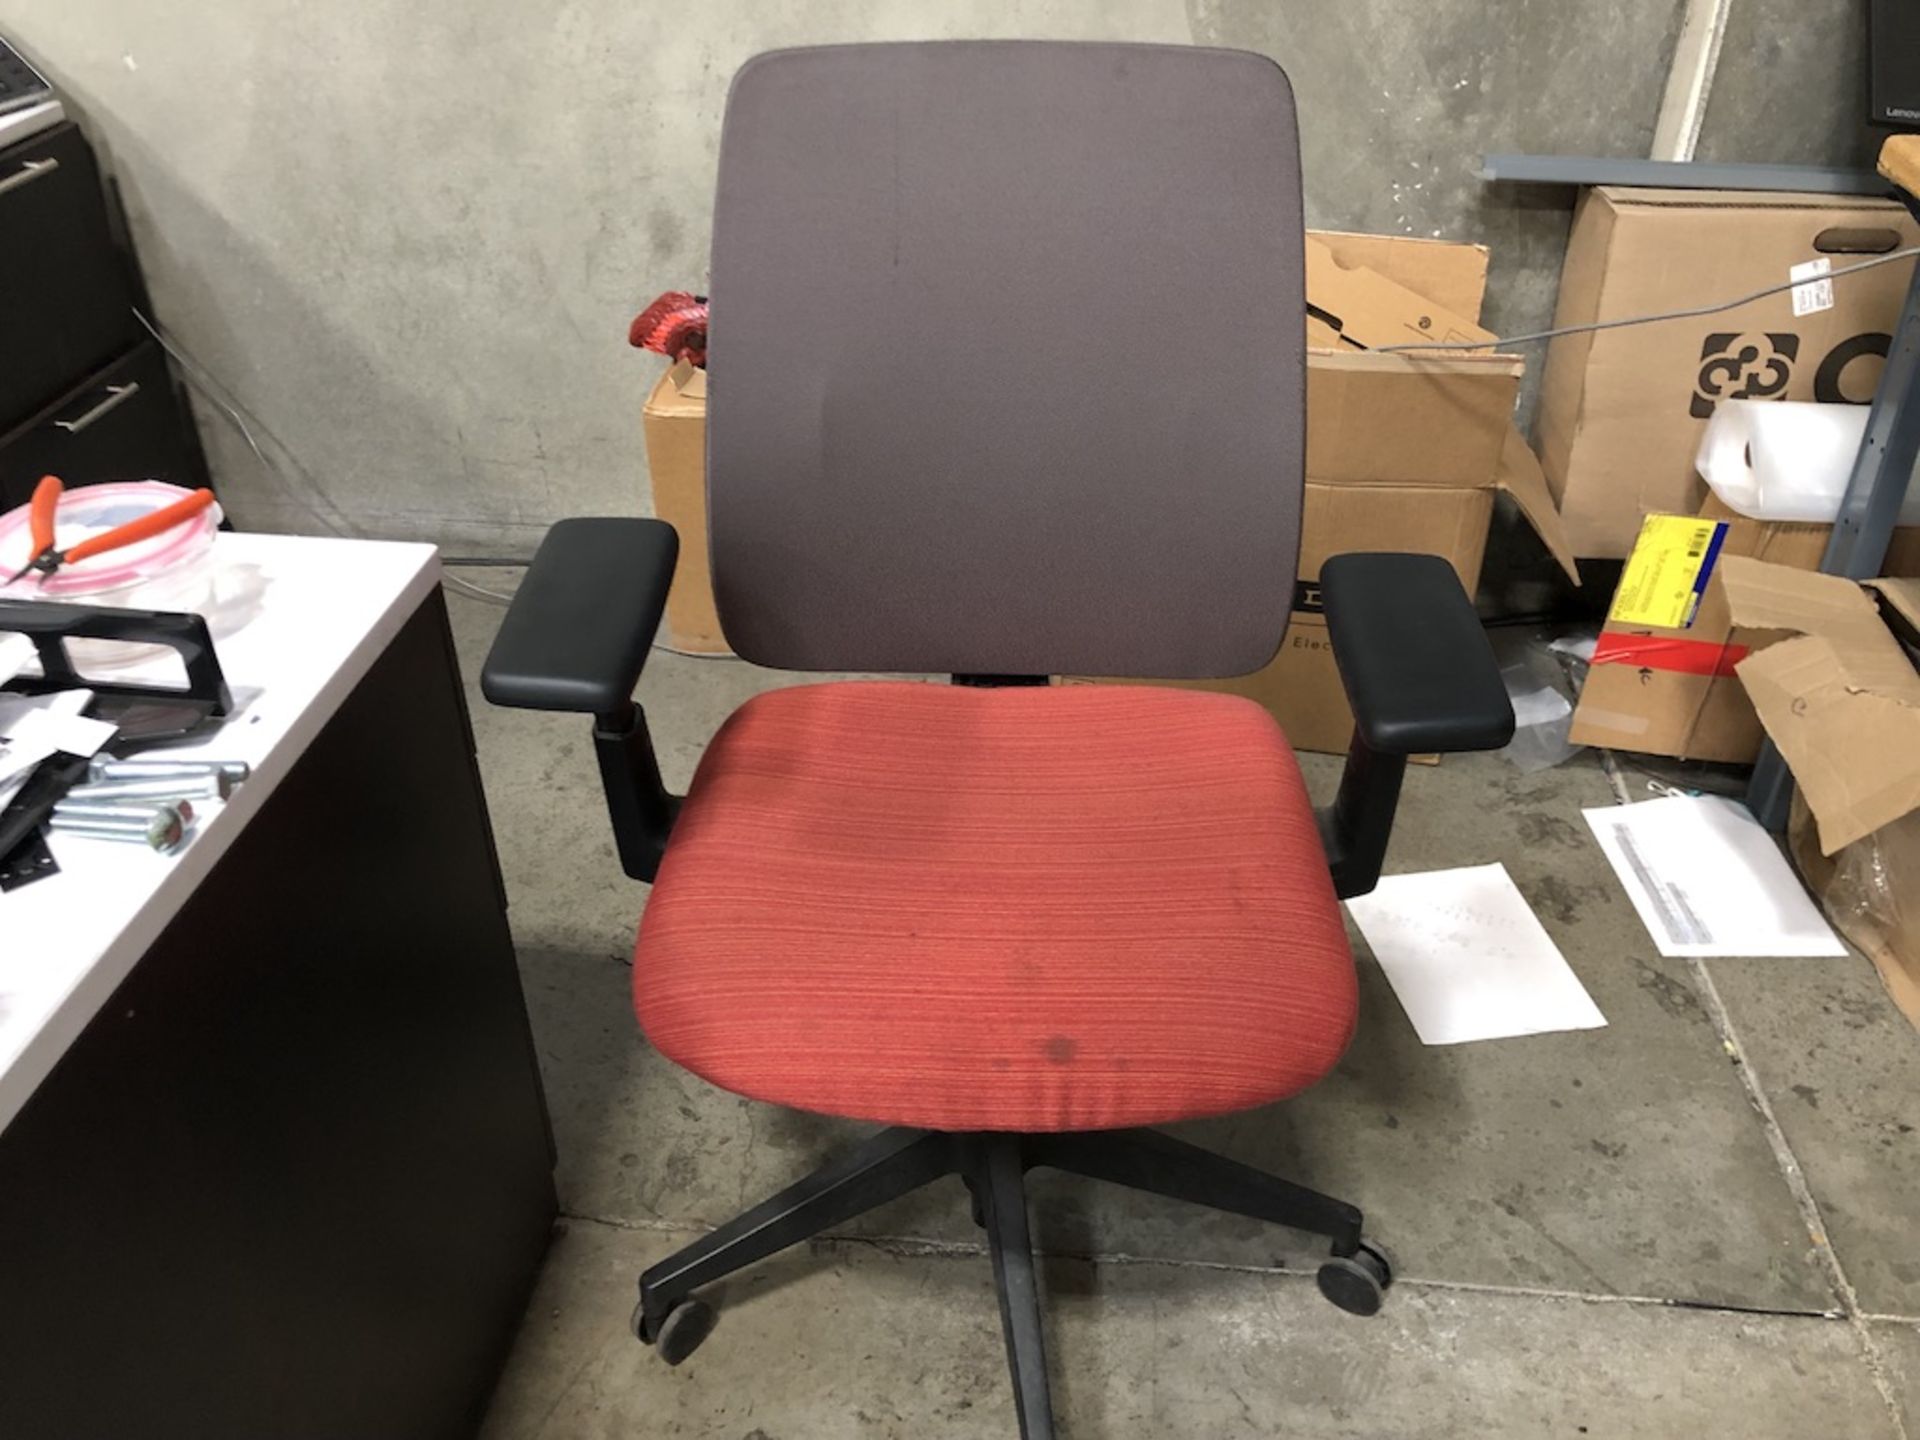 5 CASTER ORANGE CUSHION PADDED OFFICE CHAIR W/ PADDED ARM RESTS   SCHNEIDER ELECTRIC- 6611 PRESTON